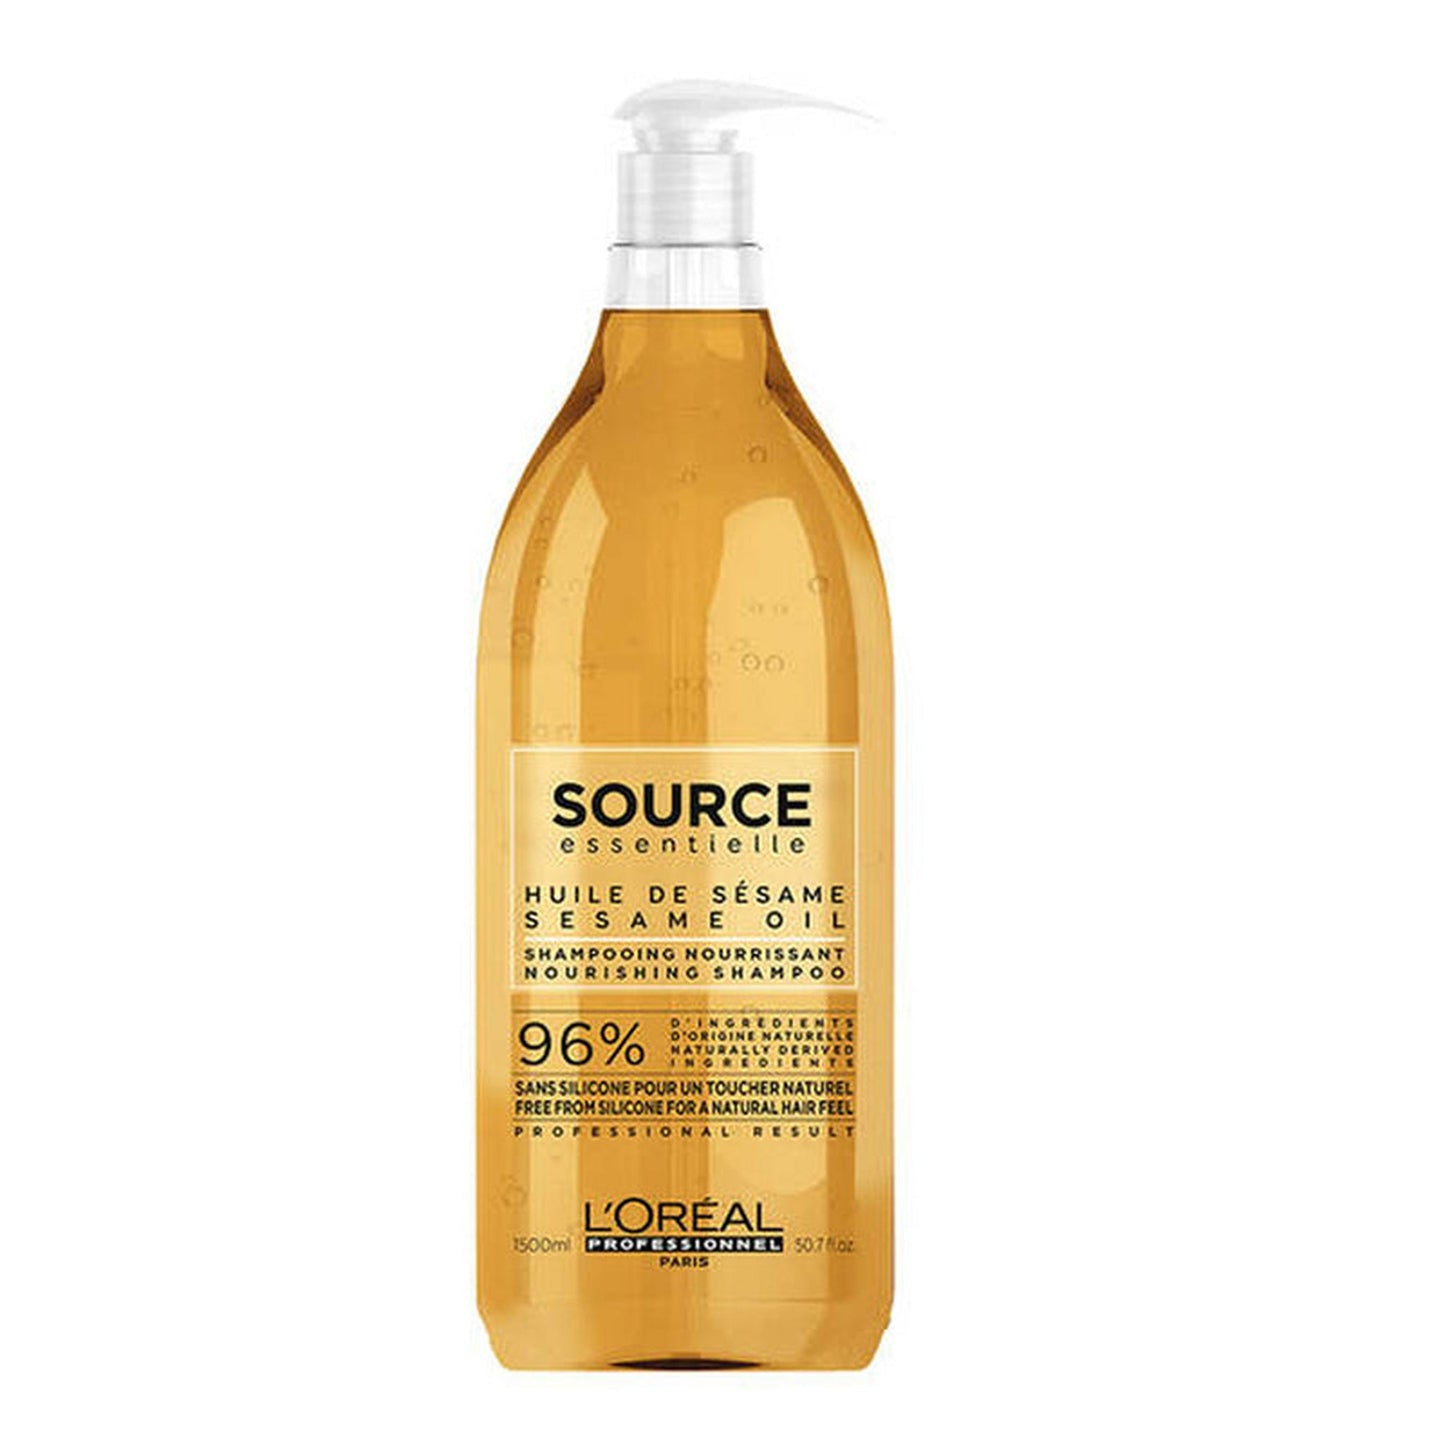 Loreal Professional Source Essentielle Nourishing System Shampoo 1500mL-L'Oreal-BeautyNmakeup.co.uk